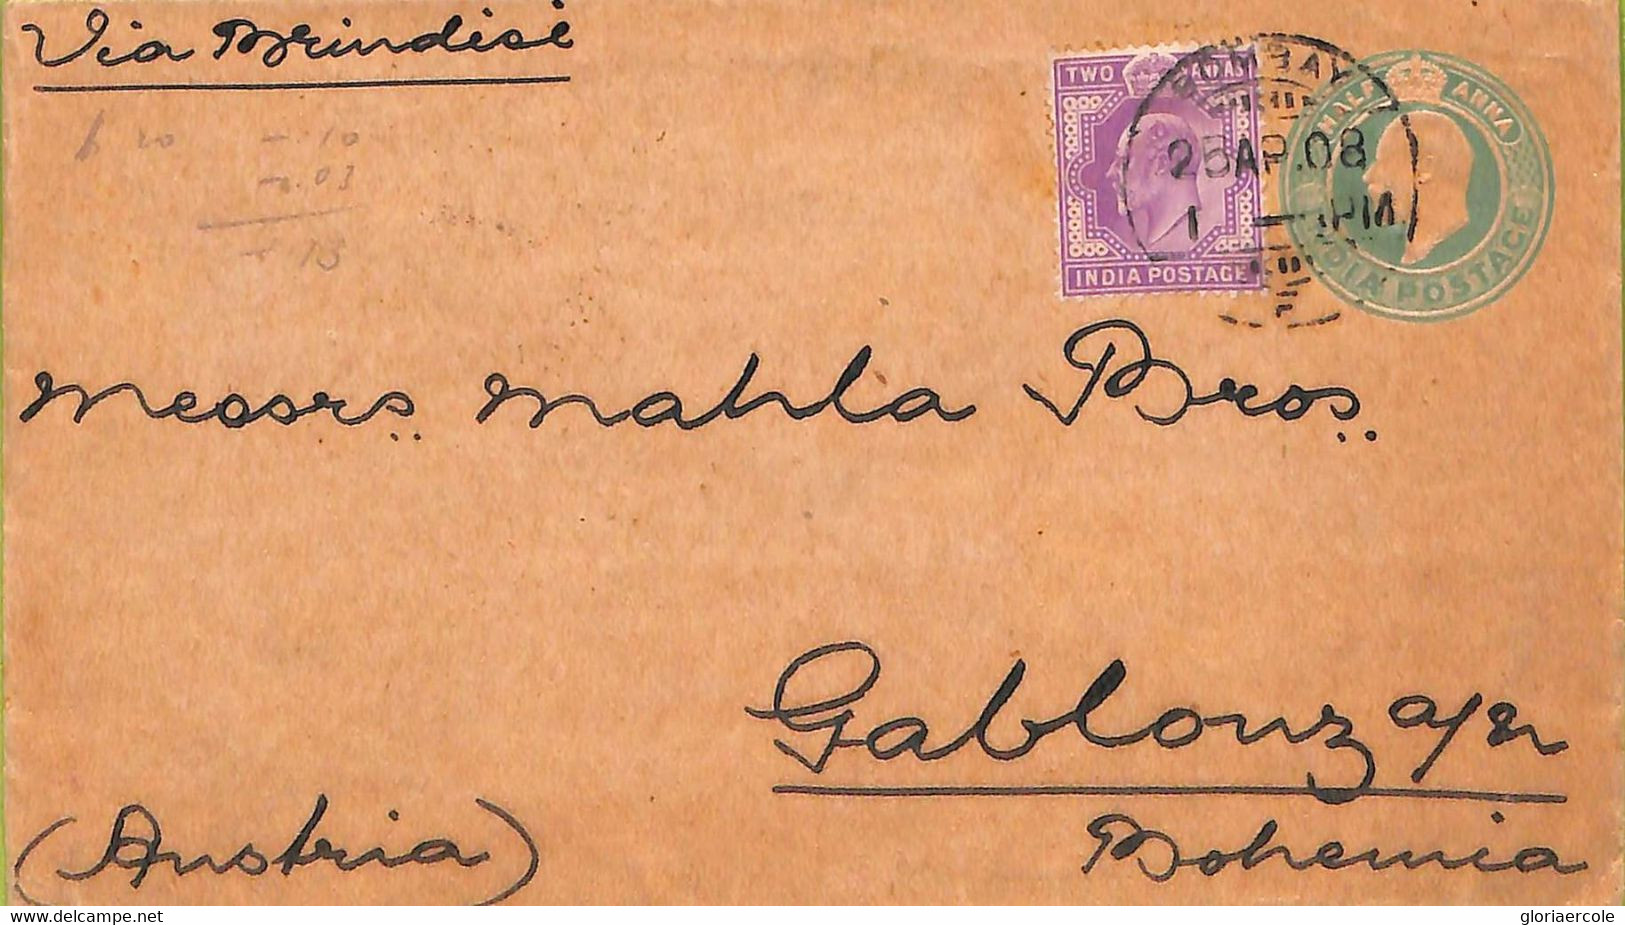 Ac6729 - INDIA - POSTAL HISTORY -  STATIONERY COVER To ITALY 1908 -  Nice! - Covers